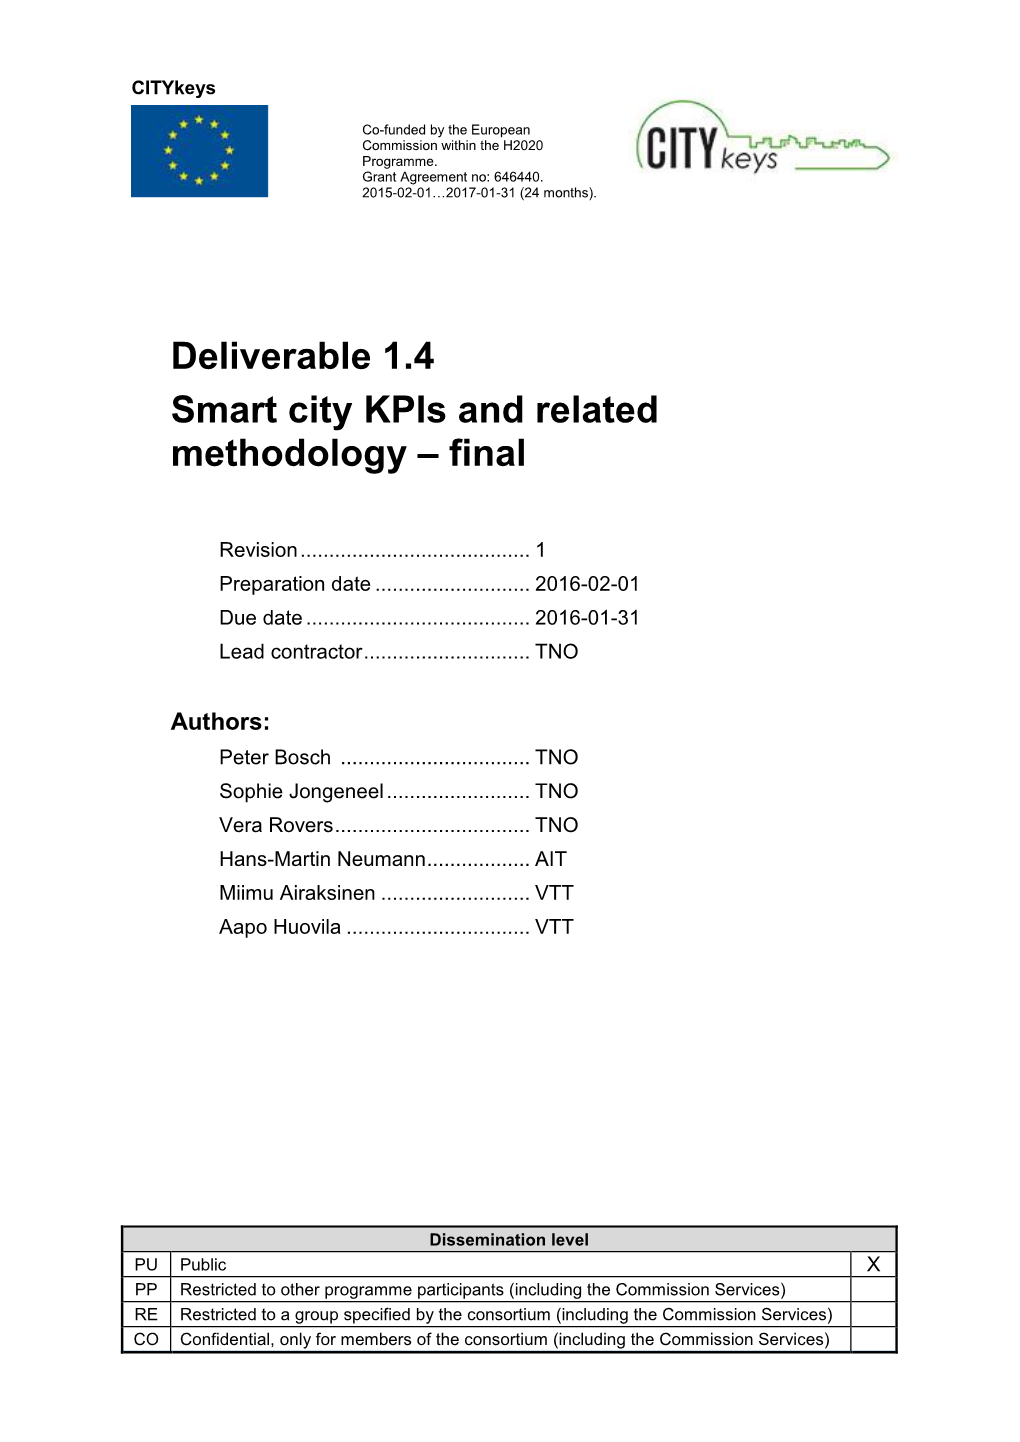 Deliverable 1.4 Smart City Kpis and Related Methodology – Final